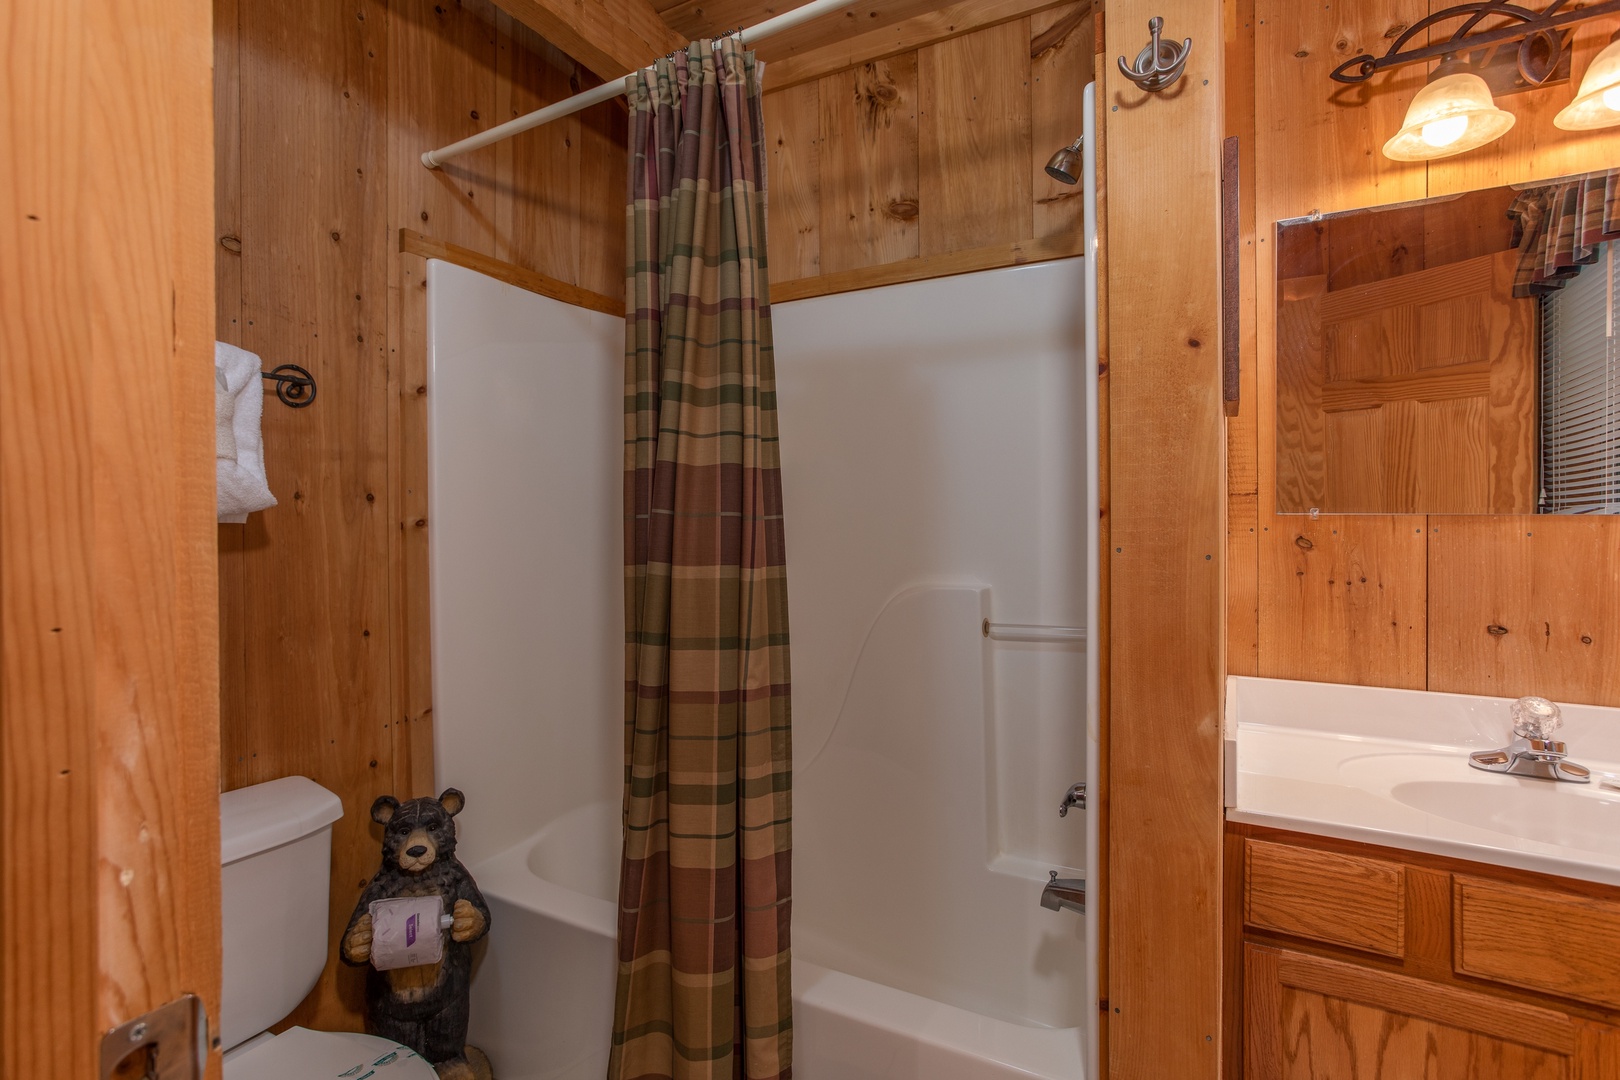 Upstairs bathroom at Bearfoot Crossing, a 1-bedroom cabin rental located in Pigeon Forge